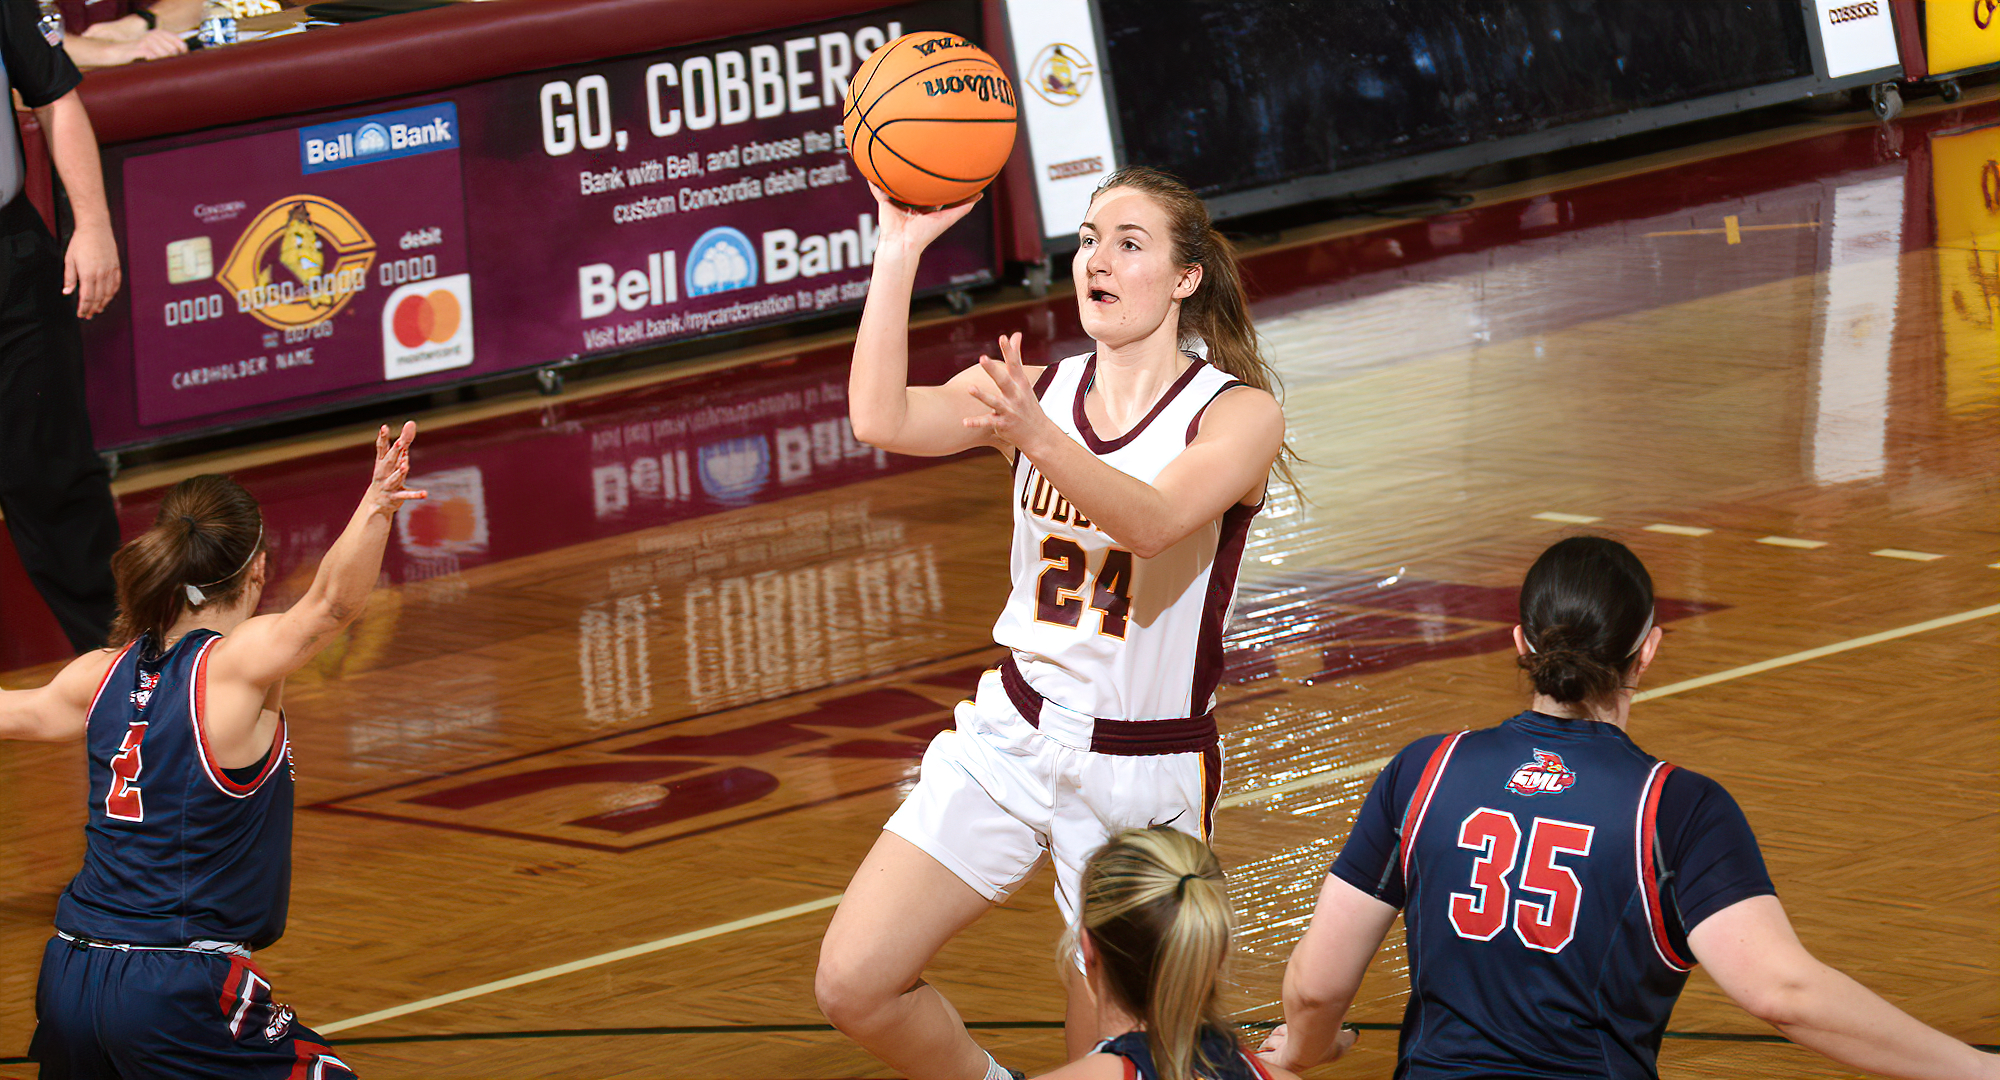 Junior Jordyn Kahler drives the lane and connects on a jumper in the first half of the Cobbers' win over St. Mary's. She finished with 17 points.